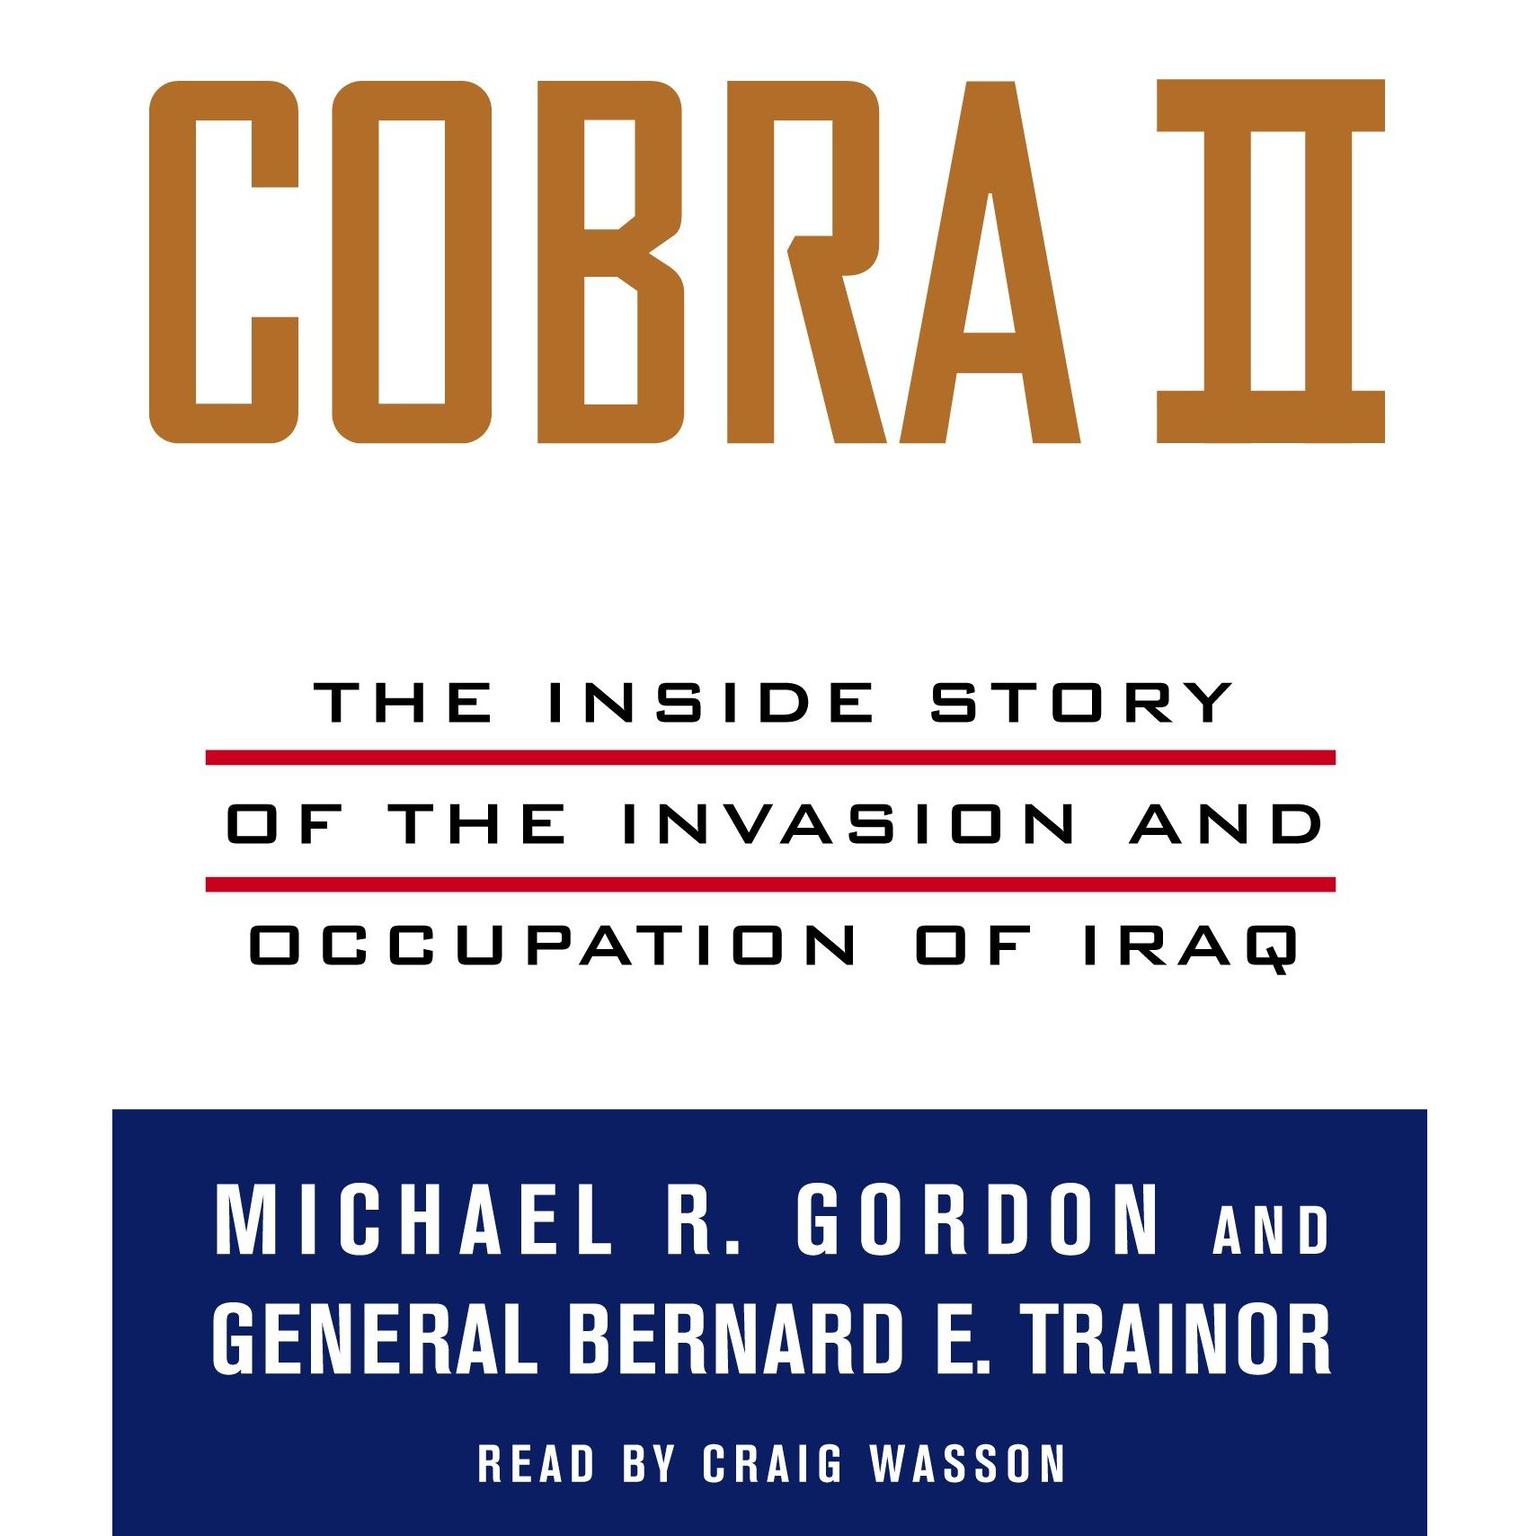 Cobra II (Abridged): The Inside Story of the Invasion and Occupation of Iraq Audiobook, by Michael R. Gordon